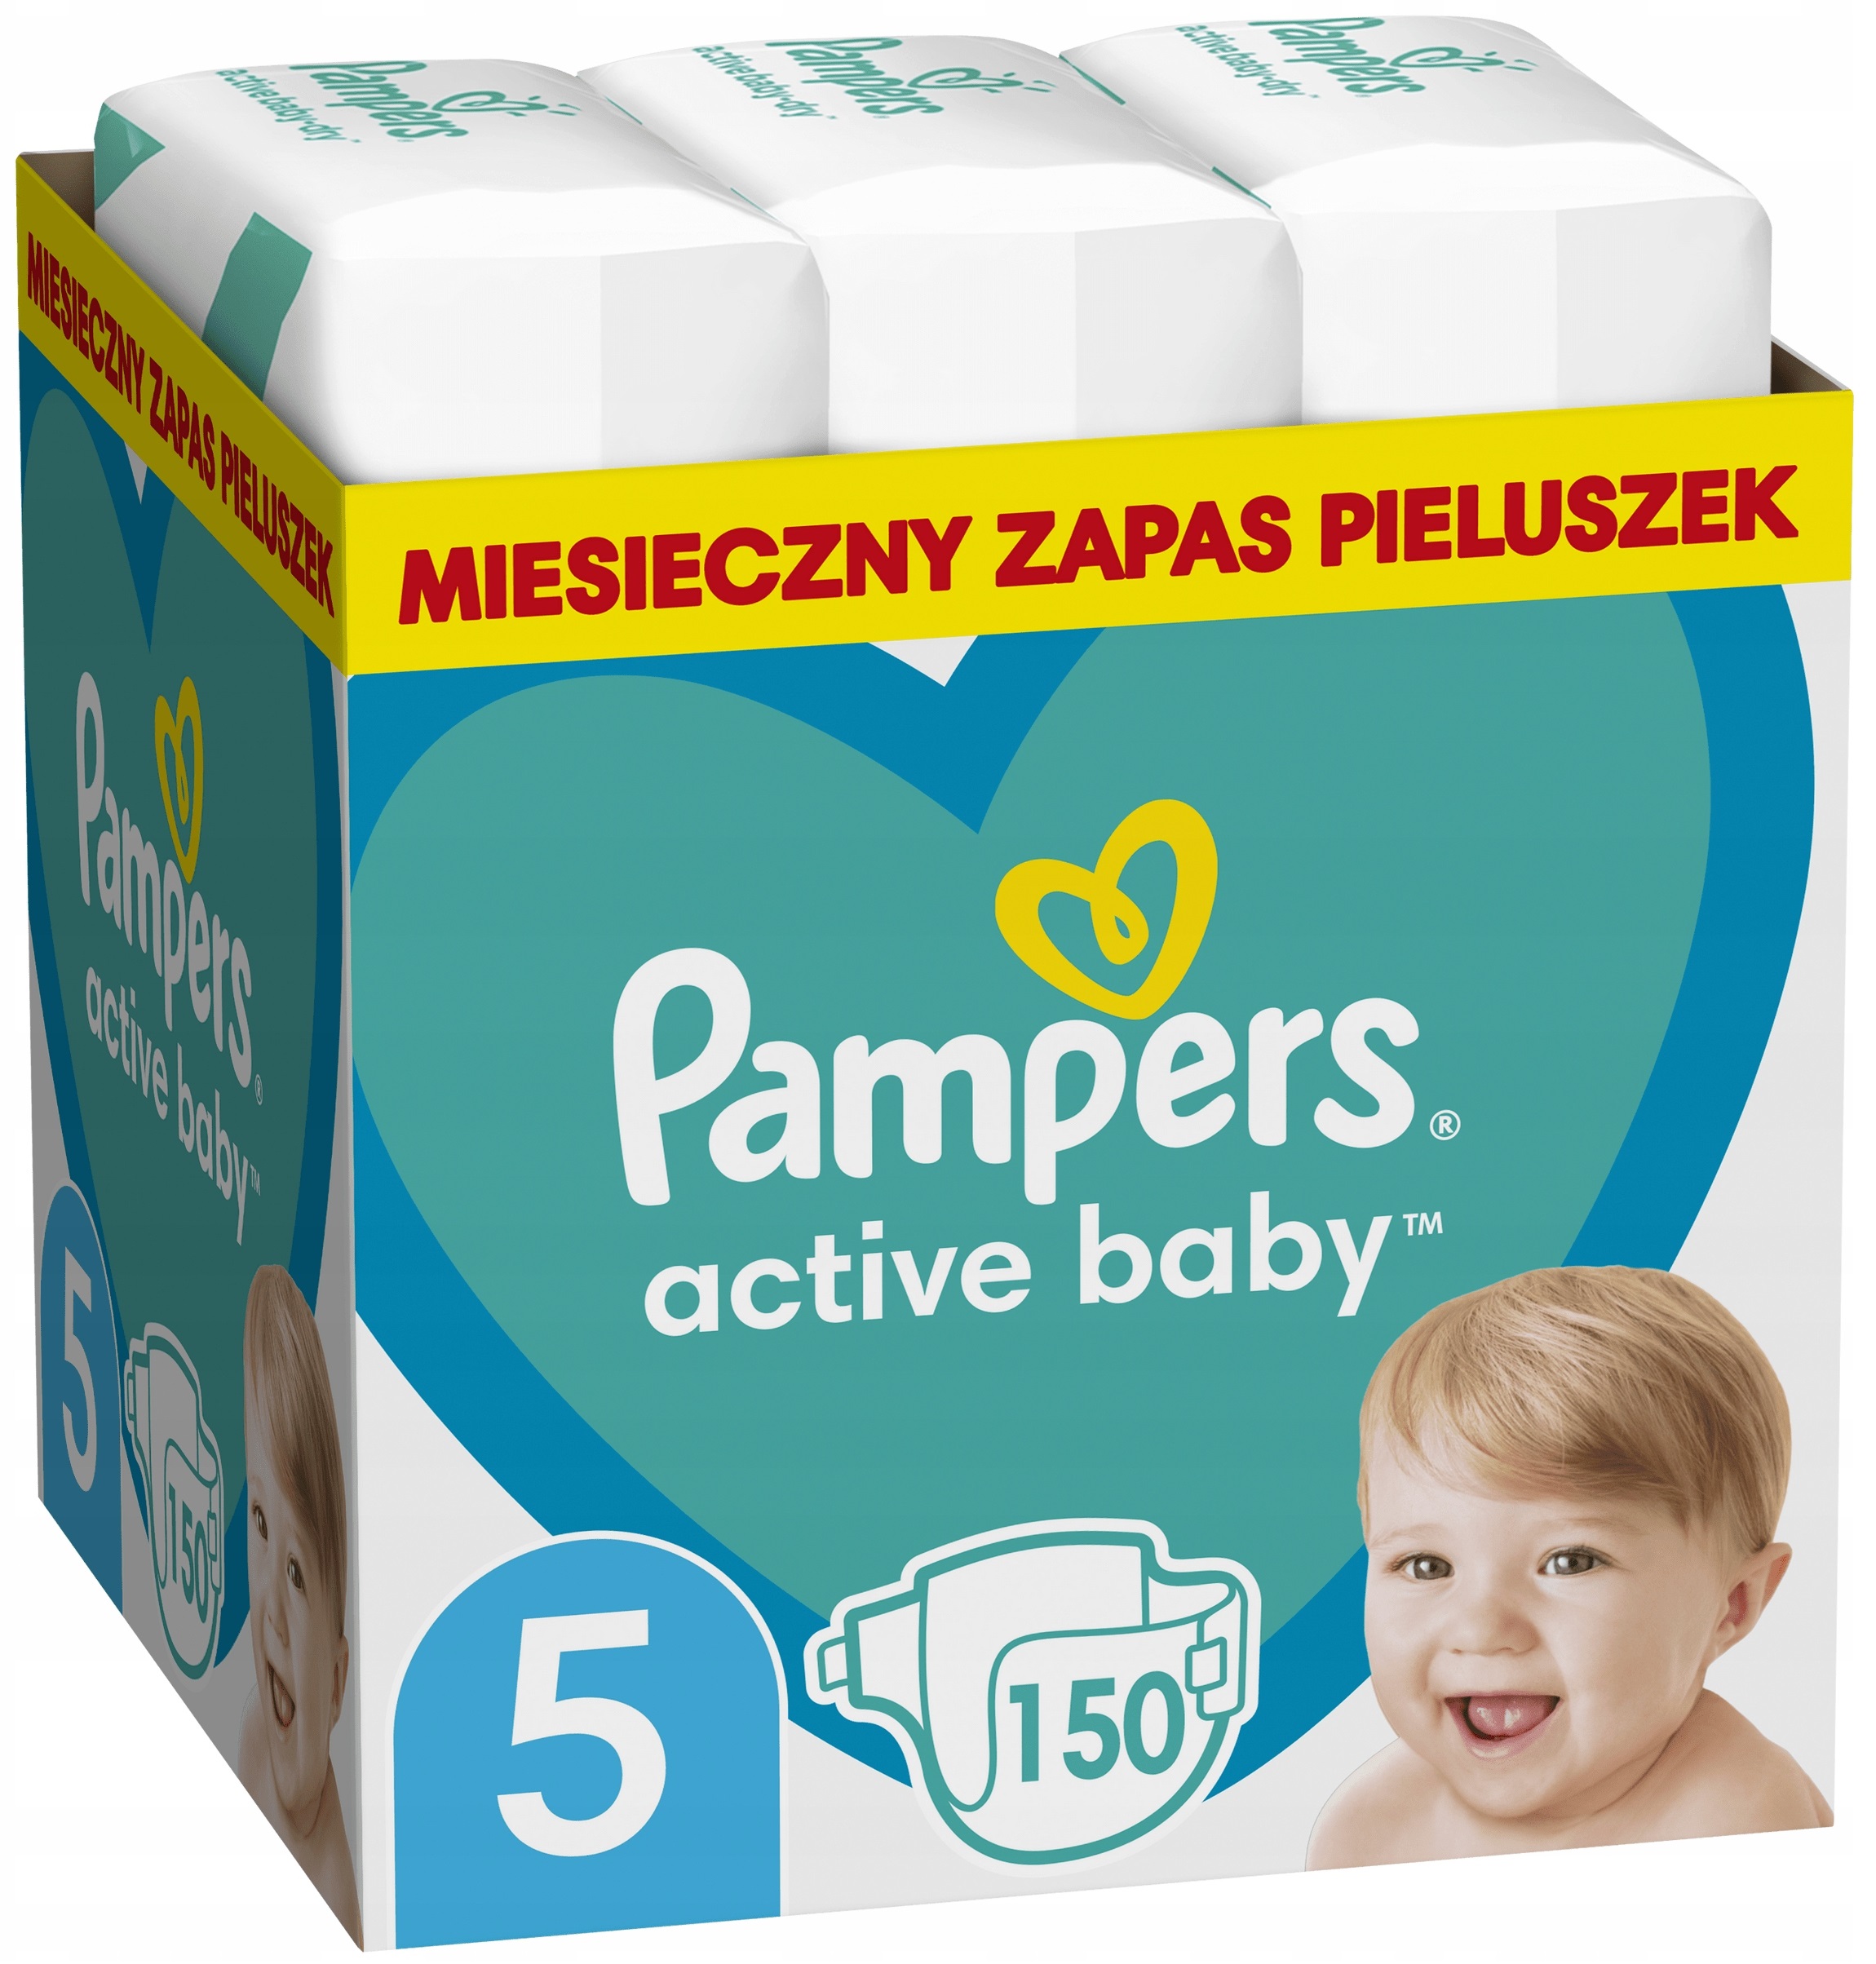 norway pampers price